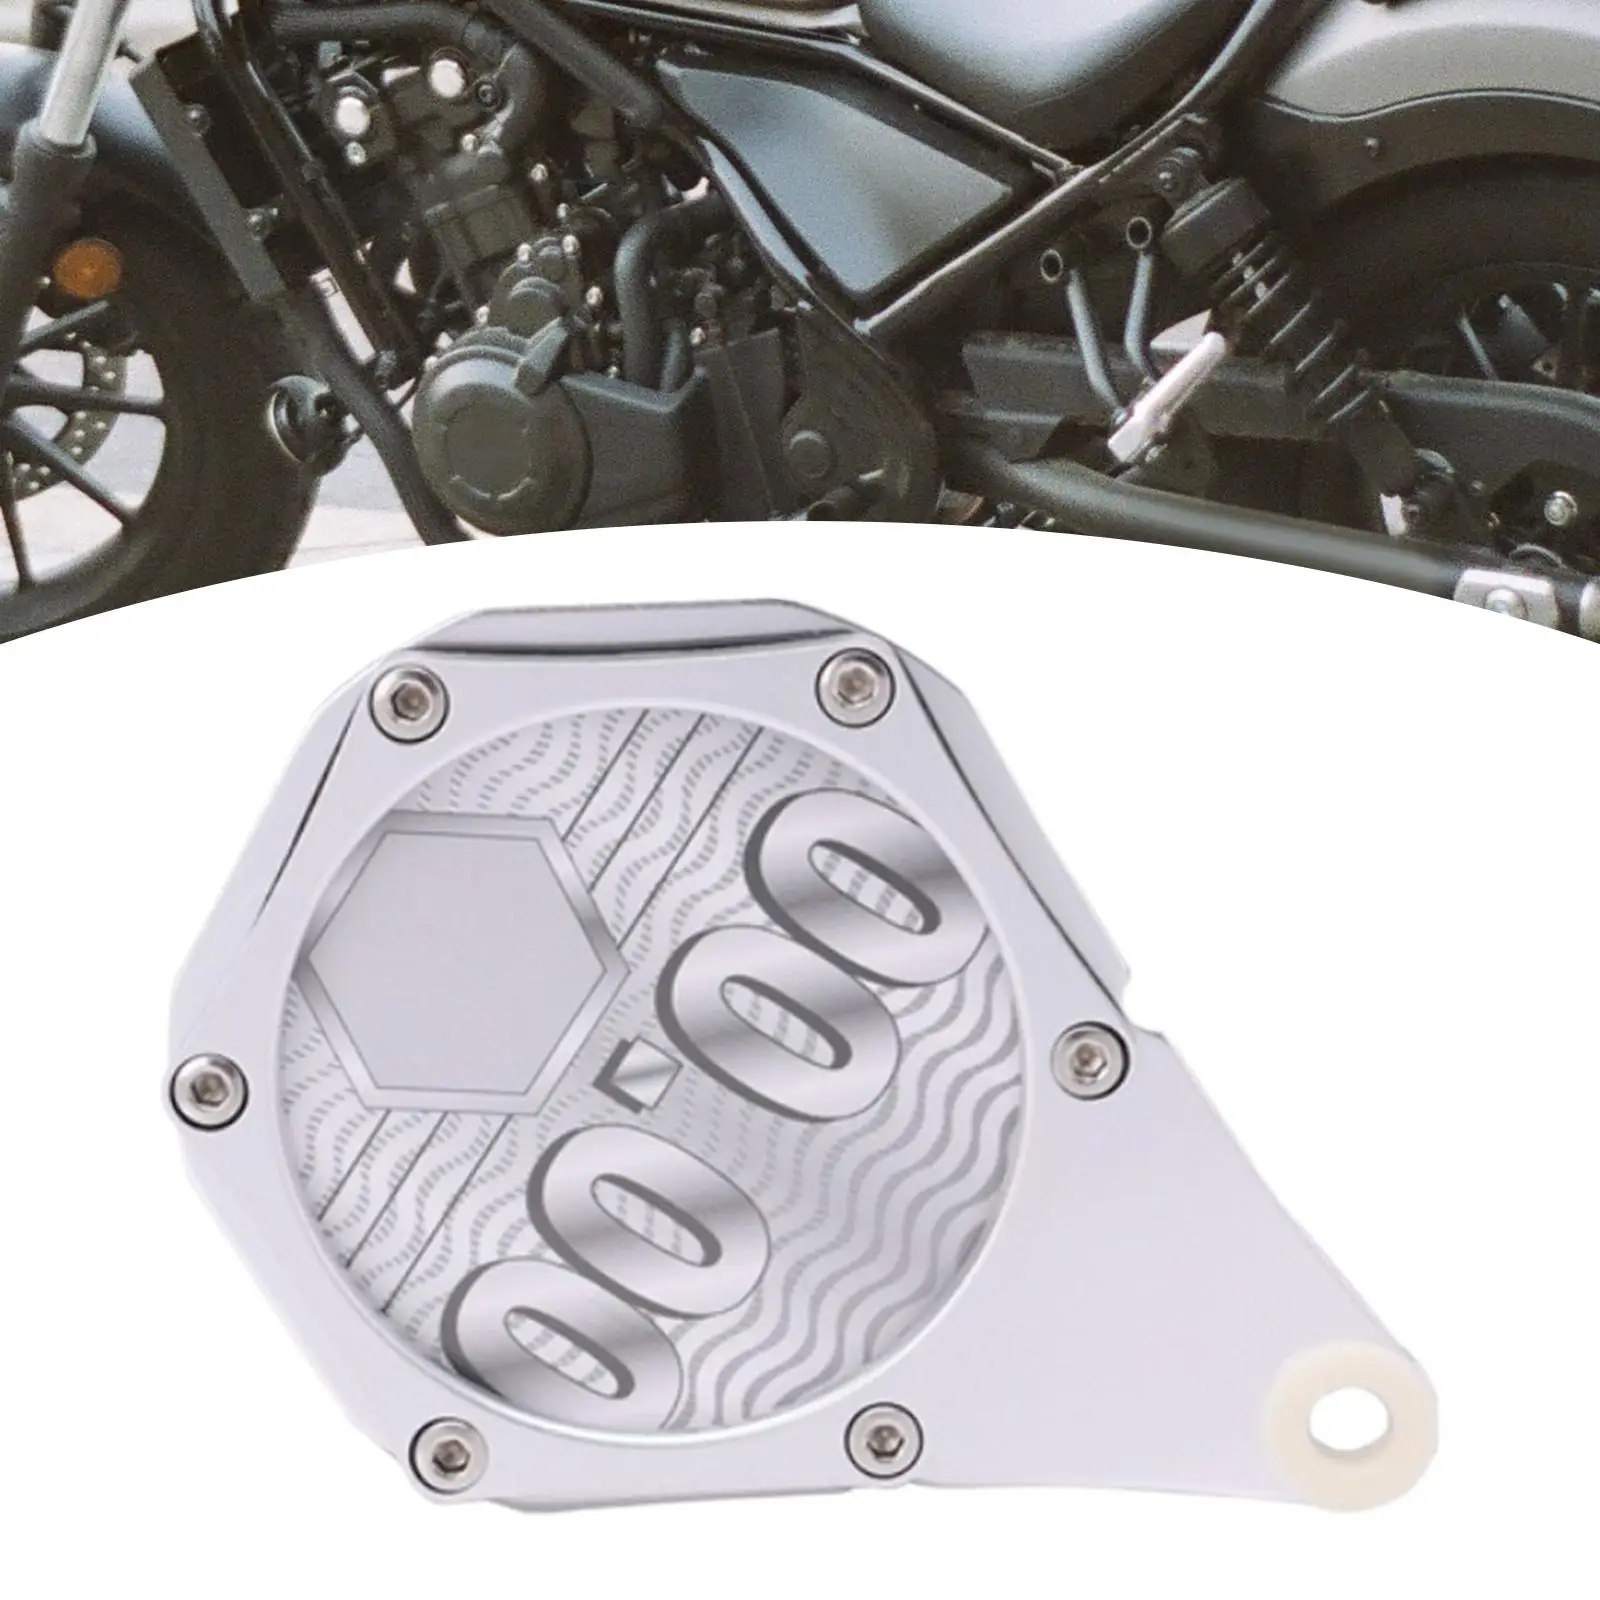 Hexagon Tax Disc Plate Tax Disc Permit Card for Bike Motorcycle Durable